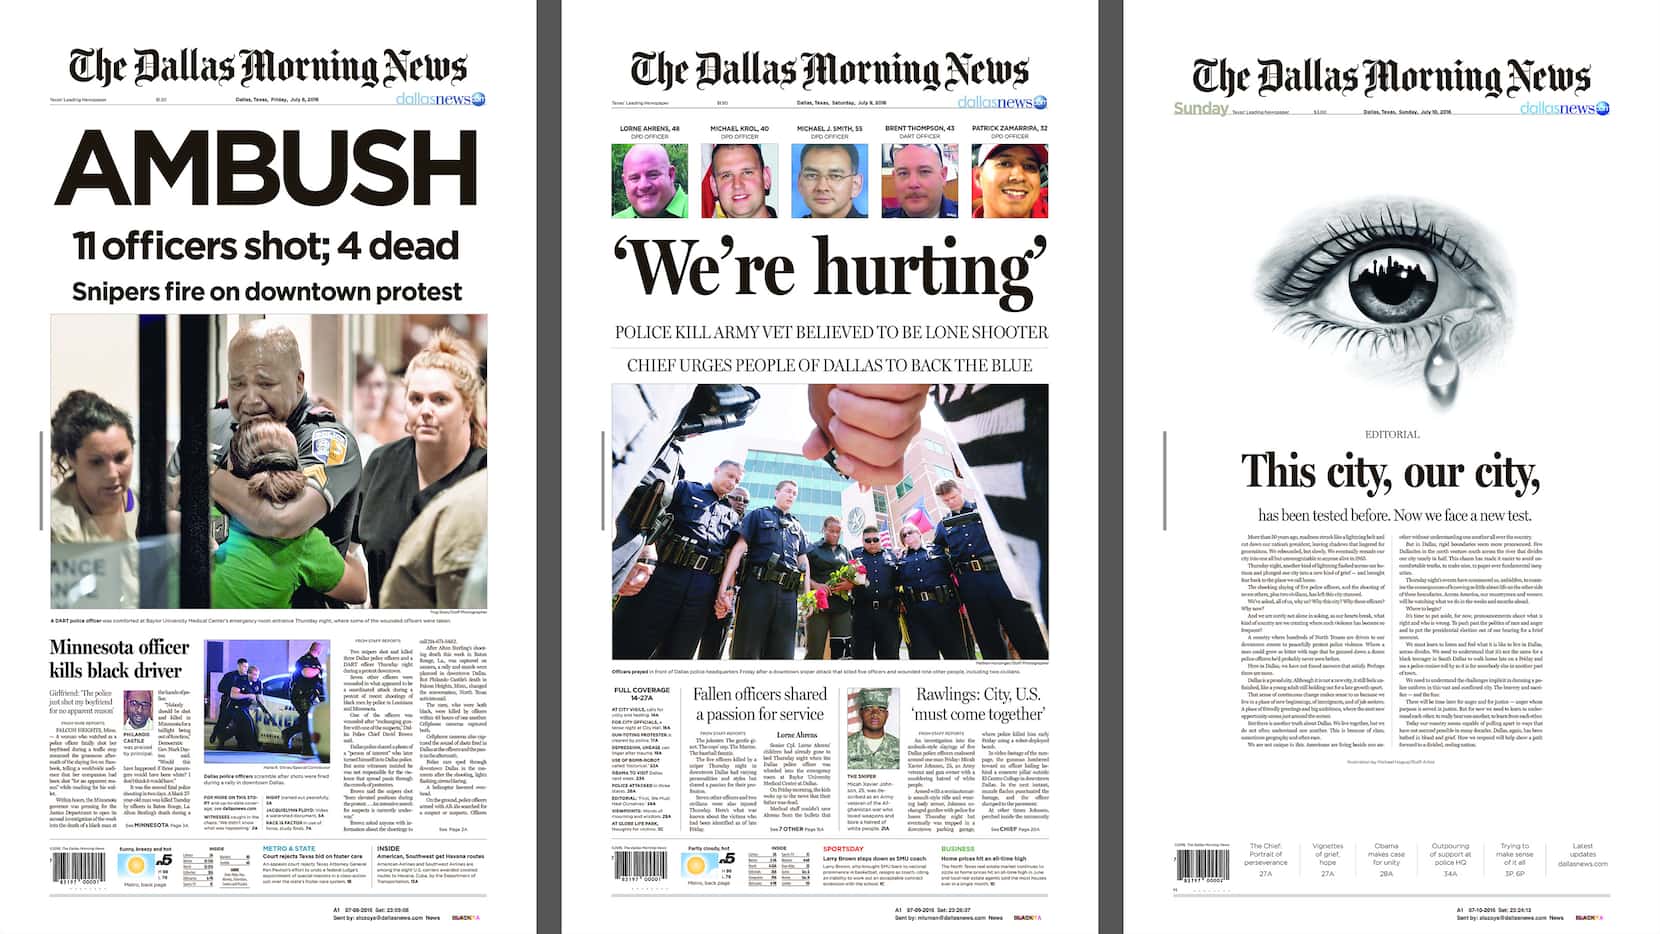 Front pages of The Dallas Morning News following the 2016 ambush of Dallas officers. 